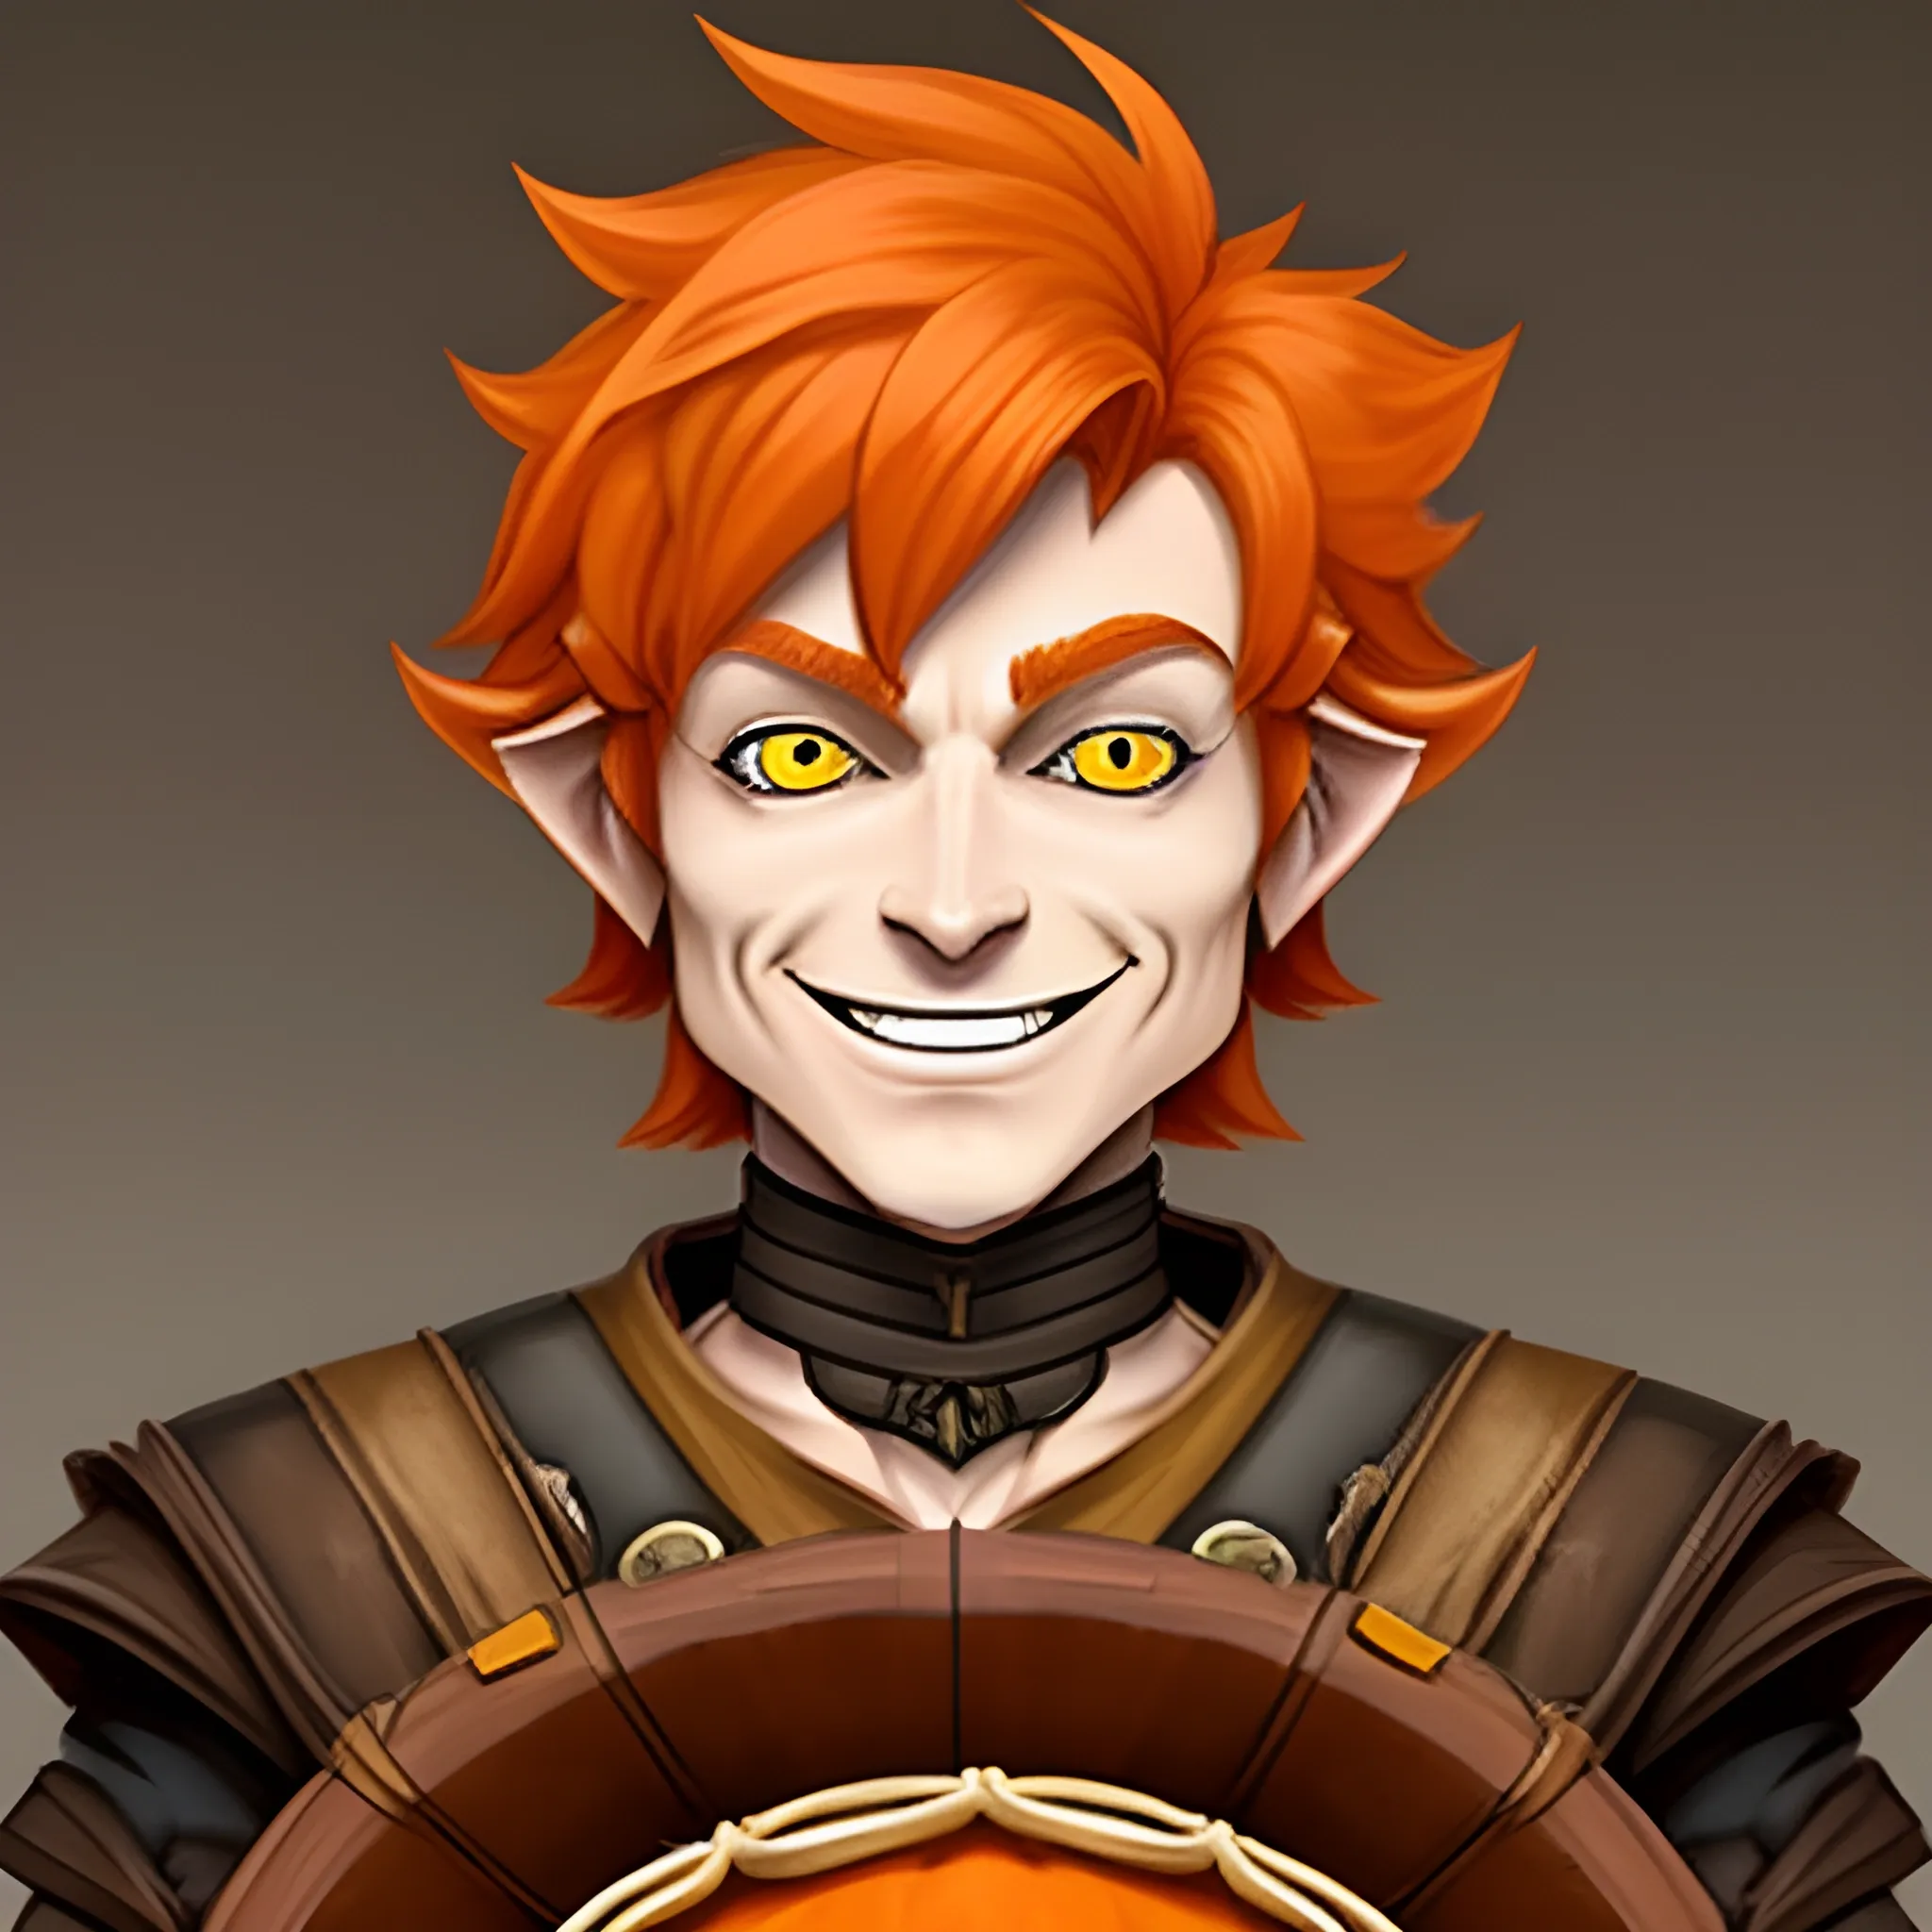 DnD fantasy frail skinny baby face tennage halfling male short haired dark orange ginger smiling with a mugshot expression and playing a drum